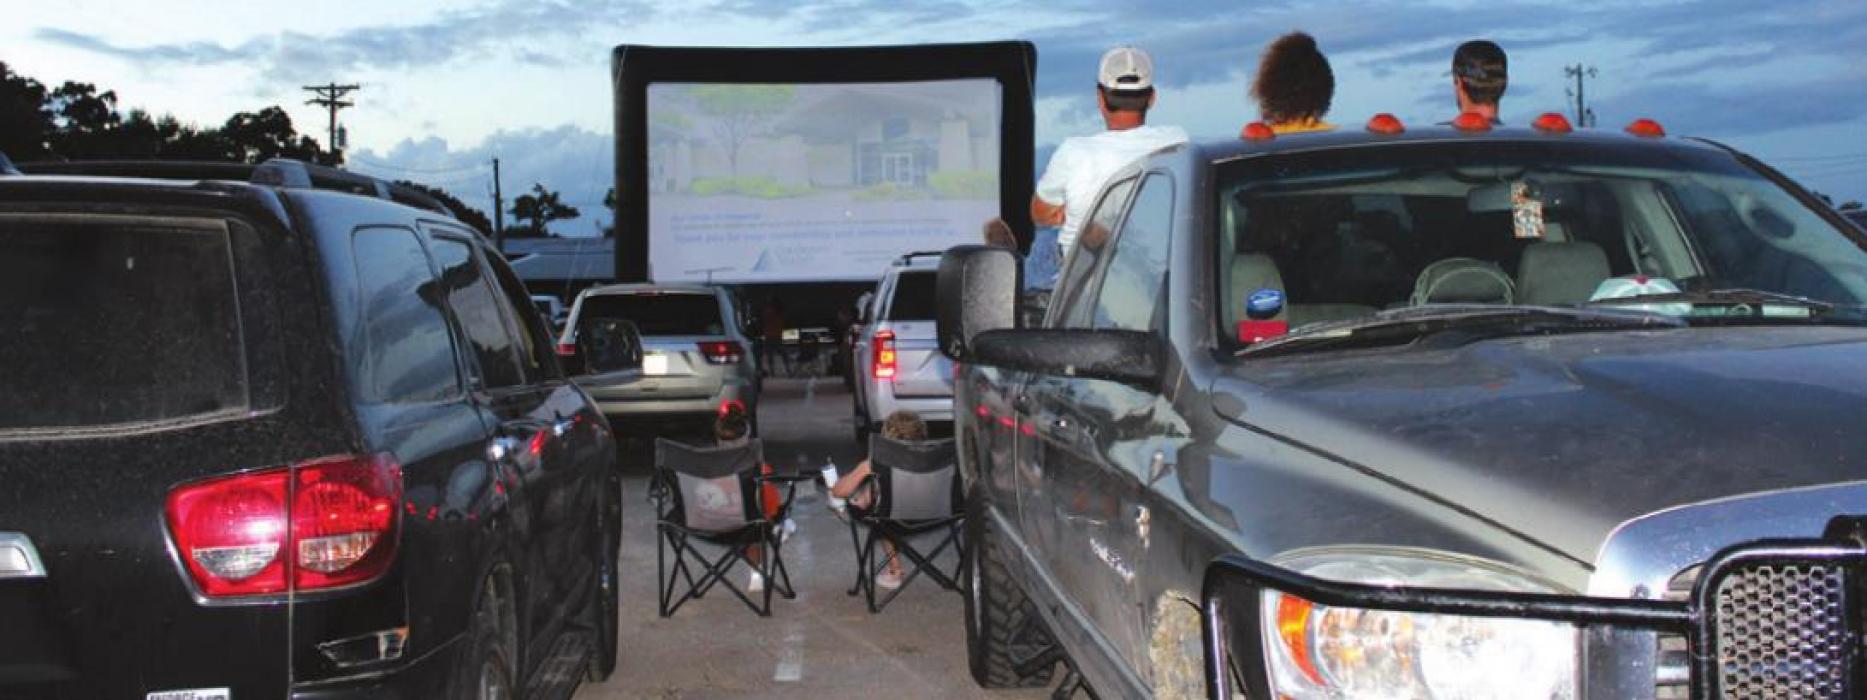 La Grange Main Street has been hosting drive-in movies at the Fairgounds in La Grange for only $5 per car. The last movie night takes place Friday, July 10, with a showing of “Frozen II.”